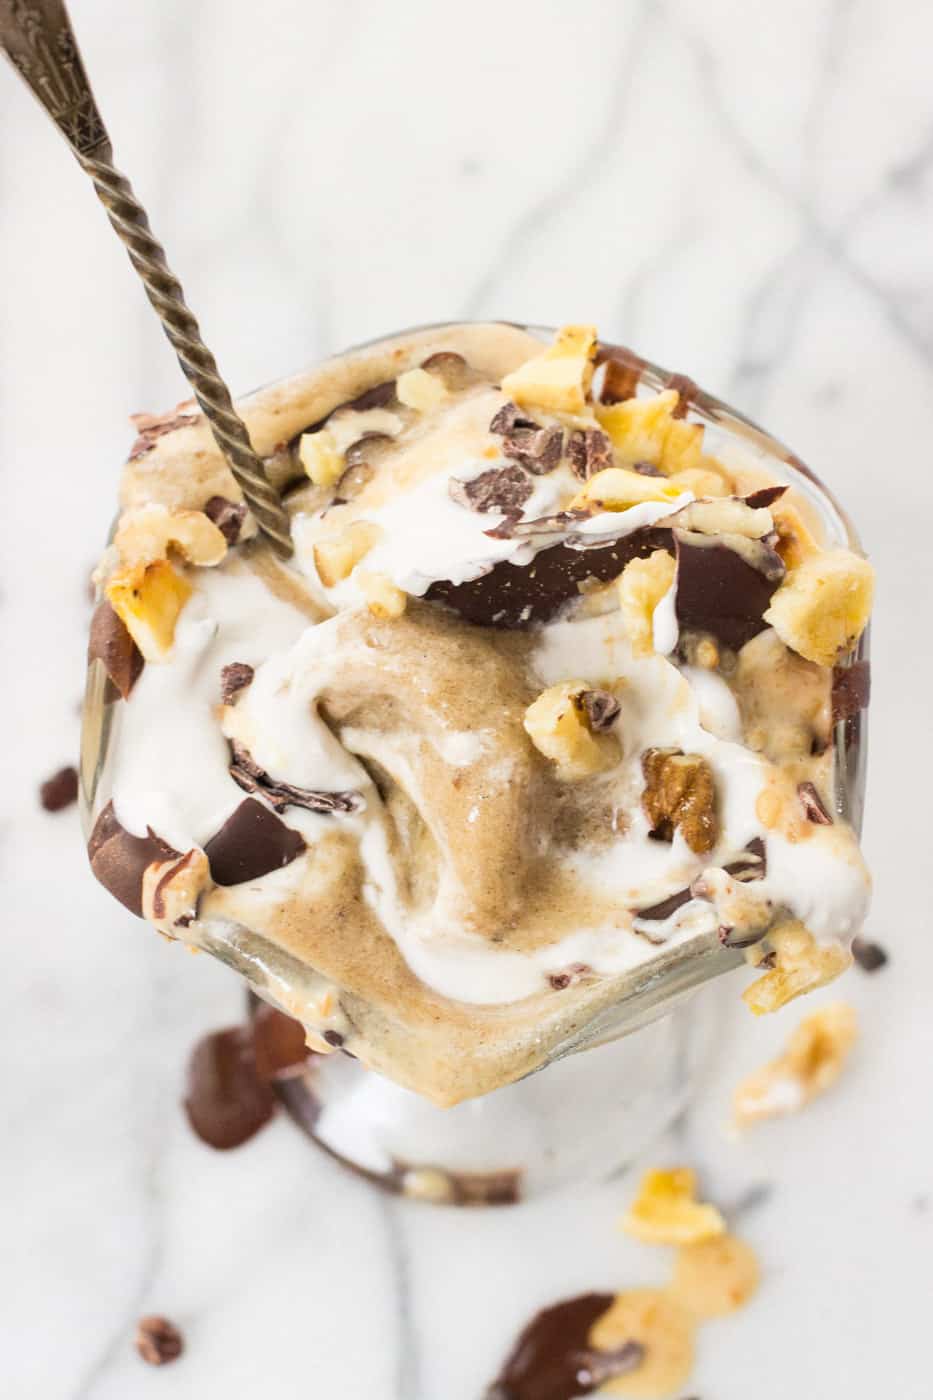 The BEST banana ice cream sundae EVER! all healthy ingredients, totally decadent and vegan too!